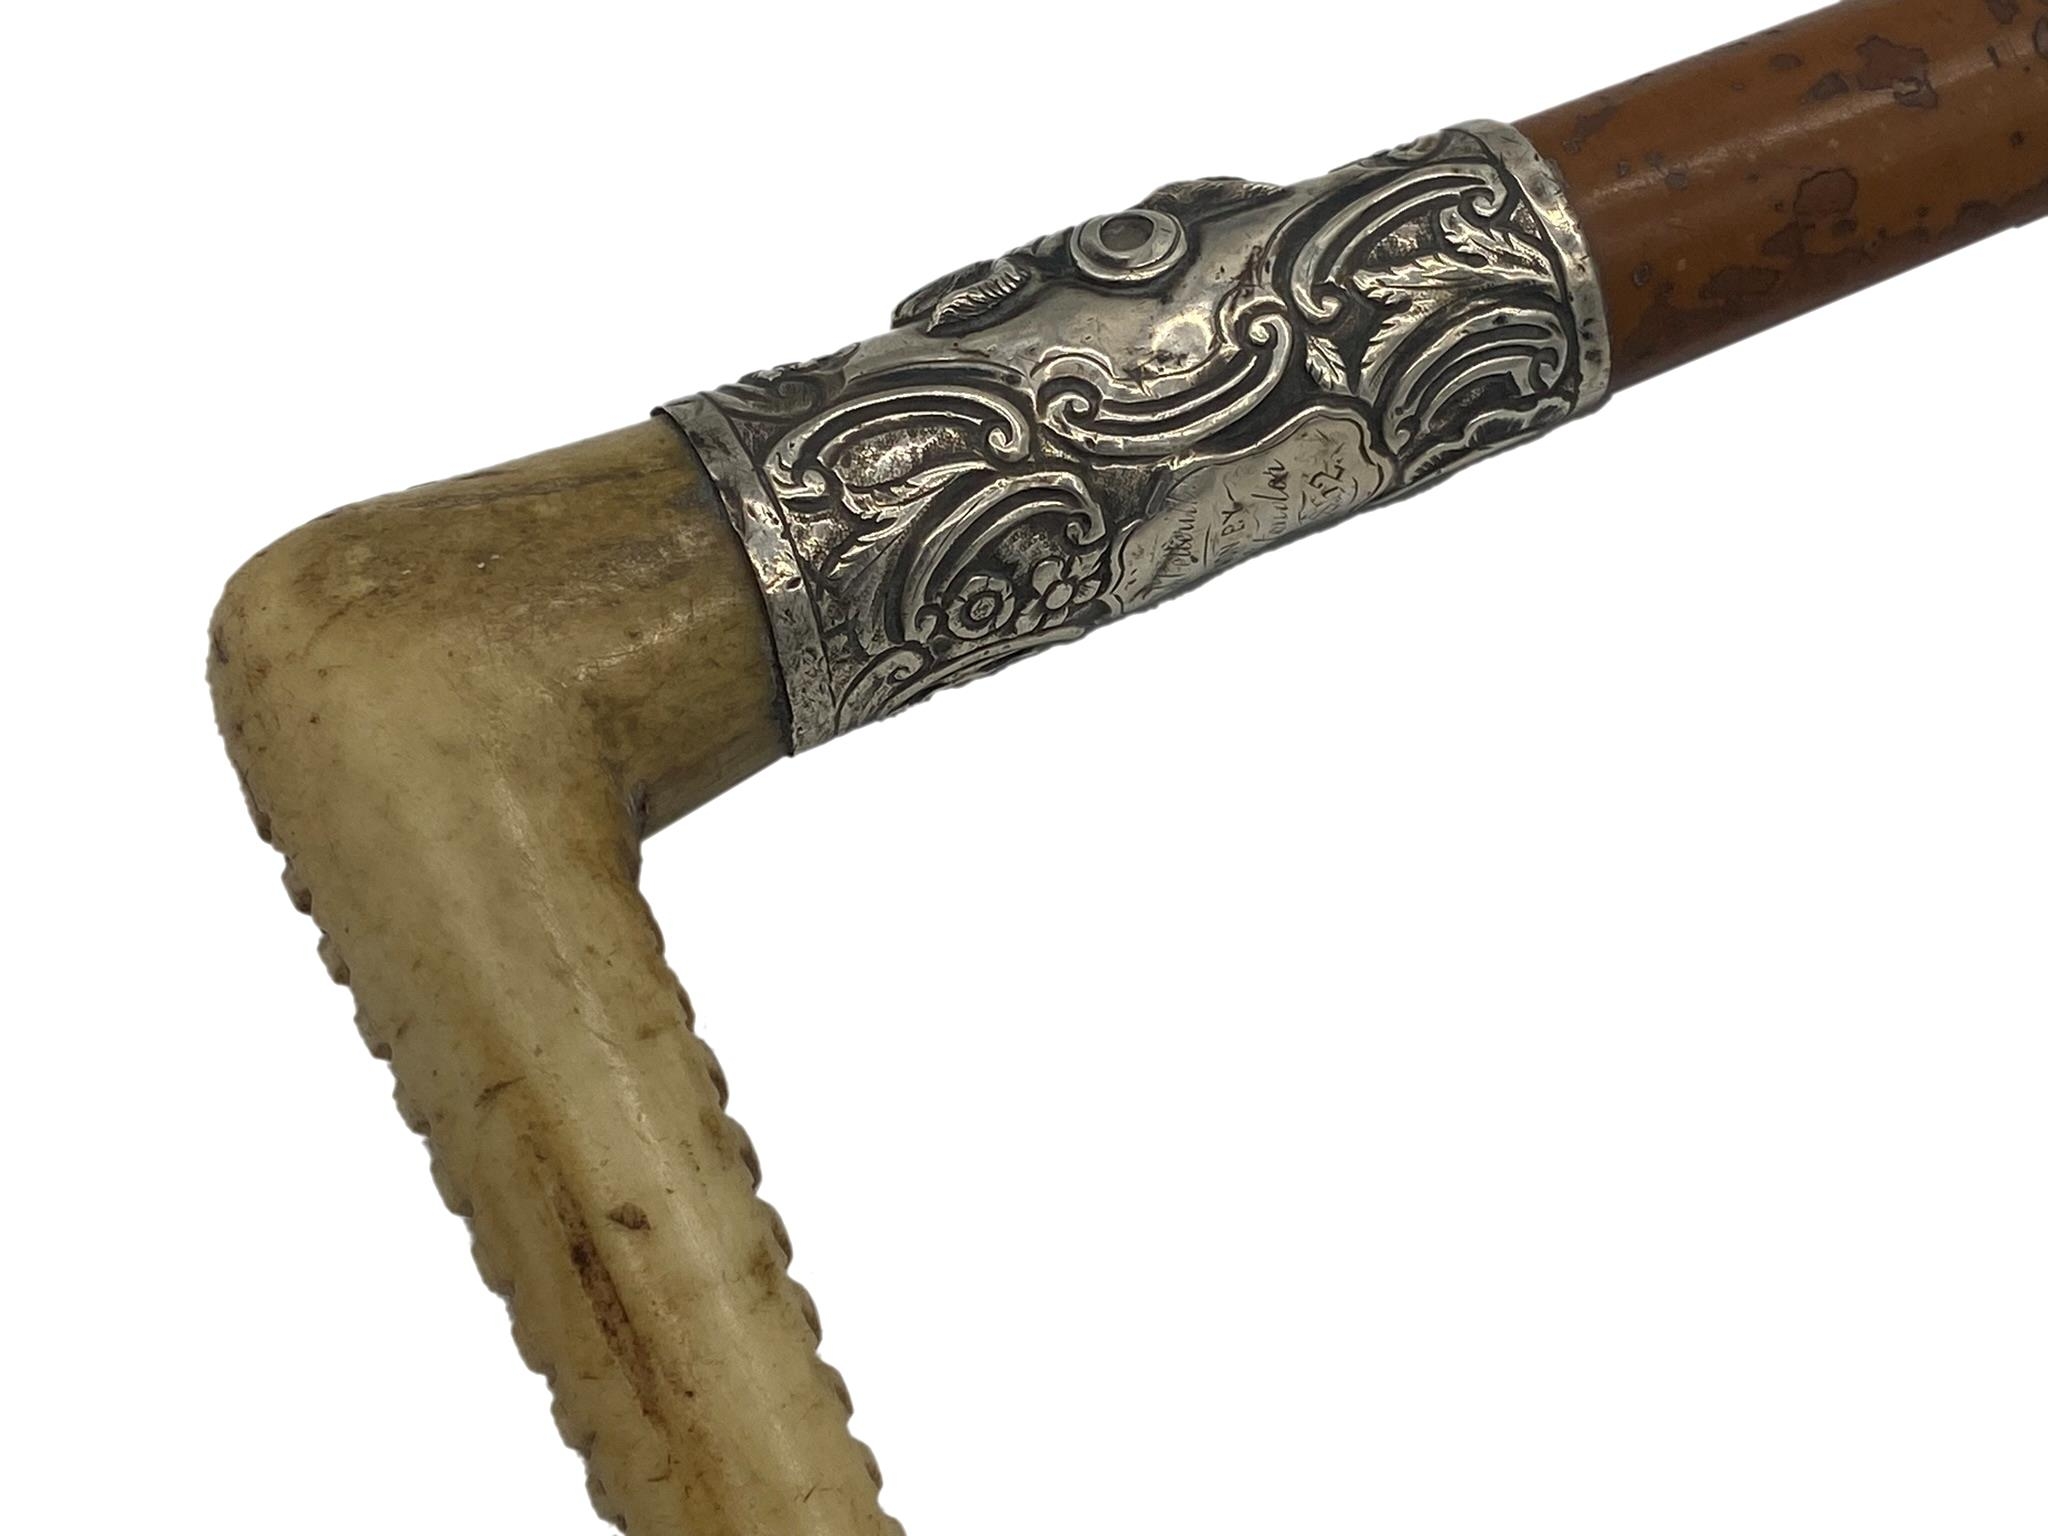 Exceptional quality early 20th century Malacca horn handled riding whip with silver collar - Image 2 of 2